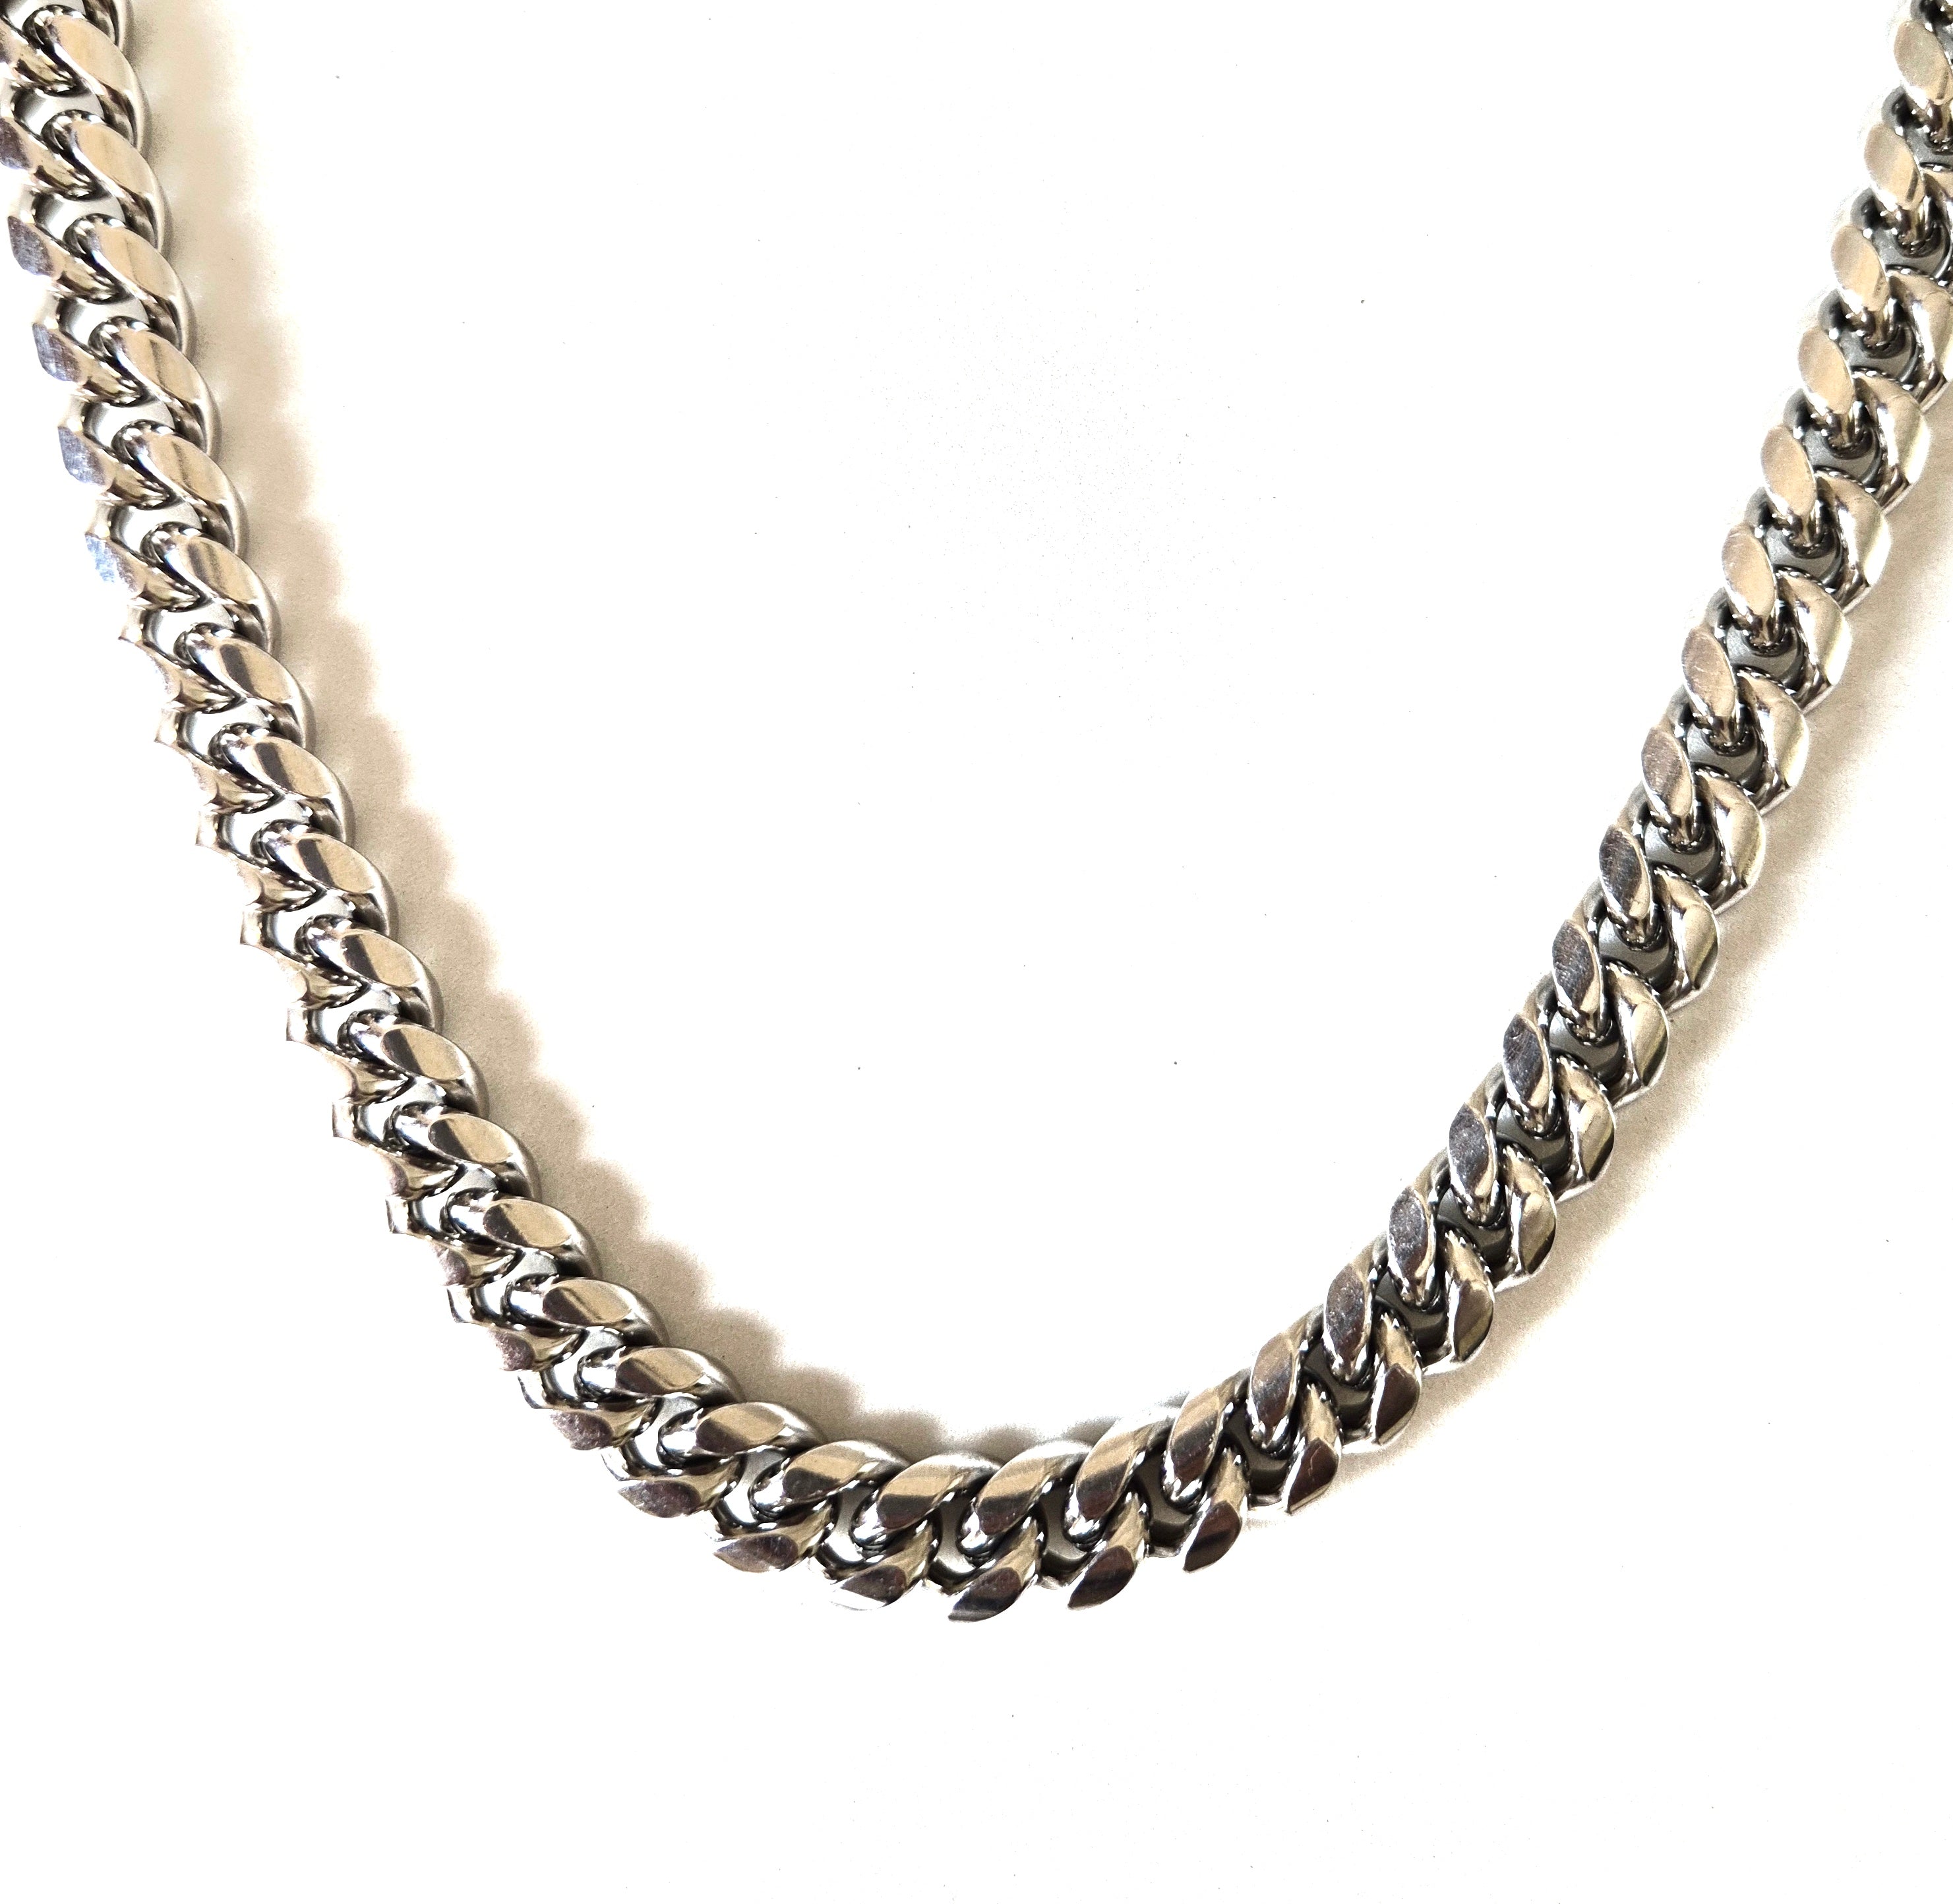 Miami cuban link Chain in white gold - 12mm by Freshice